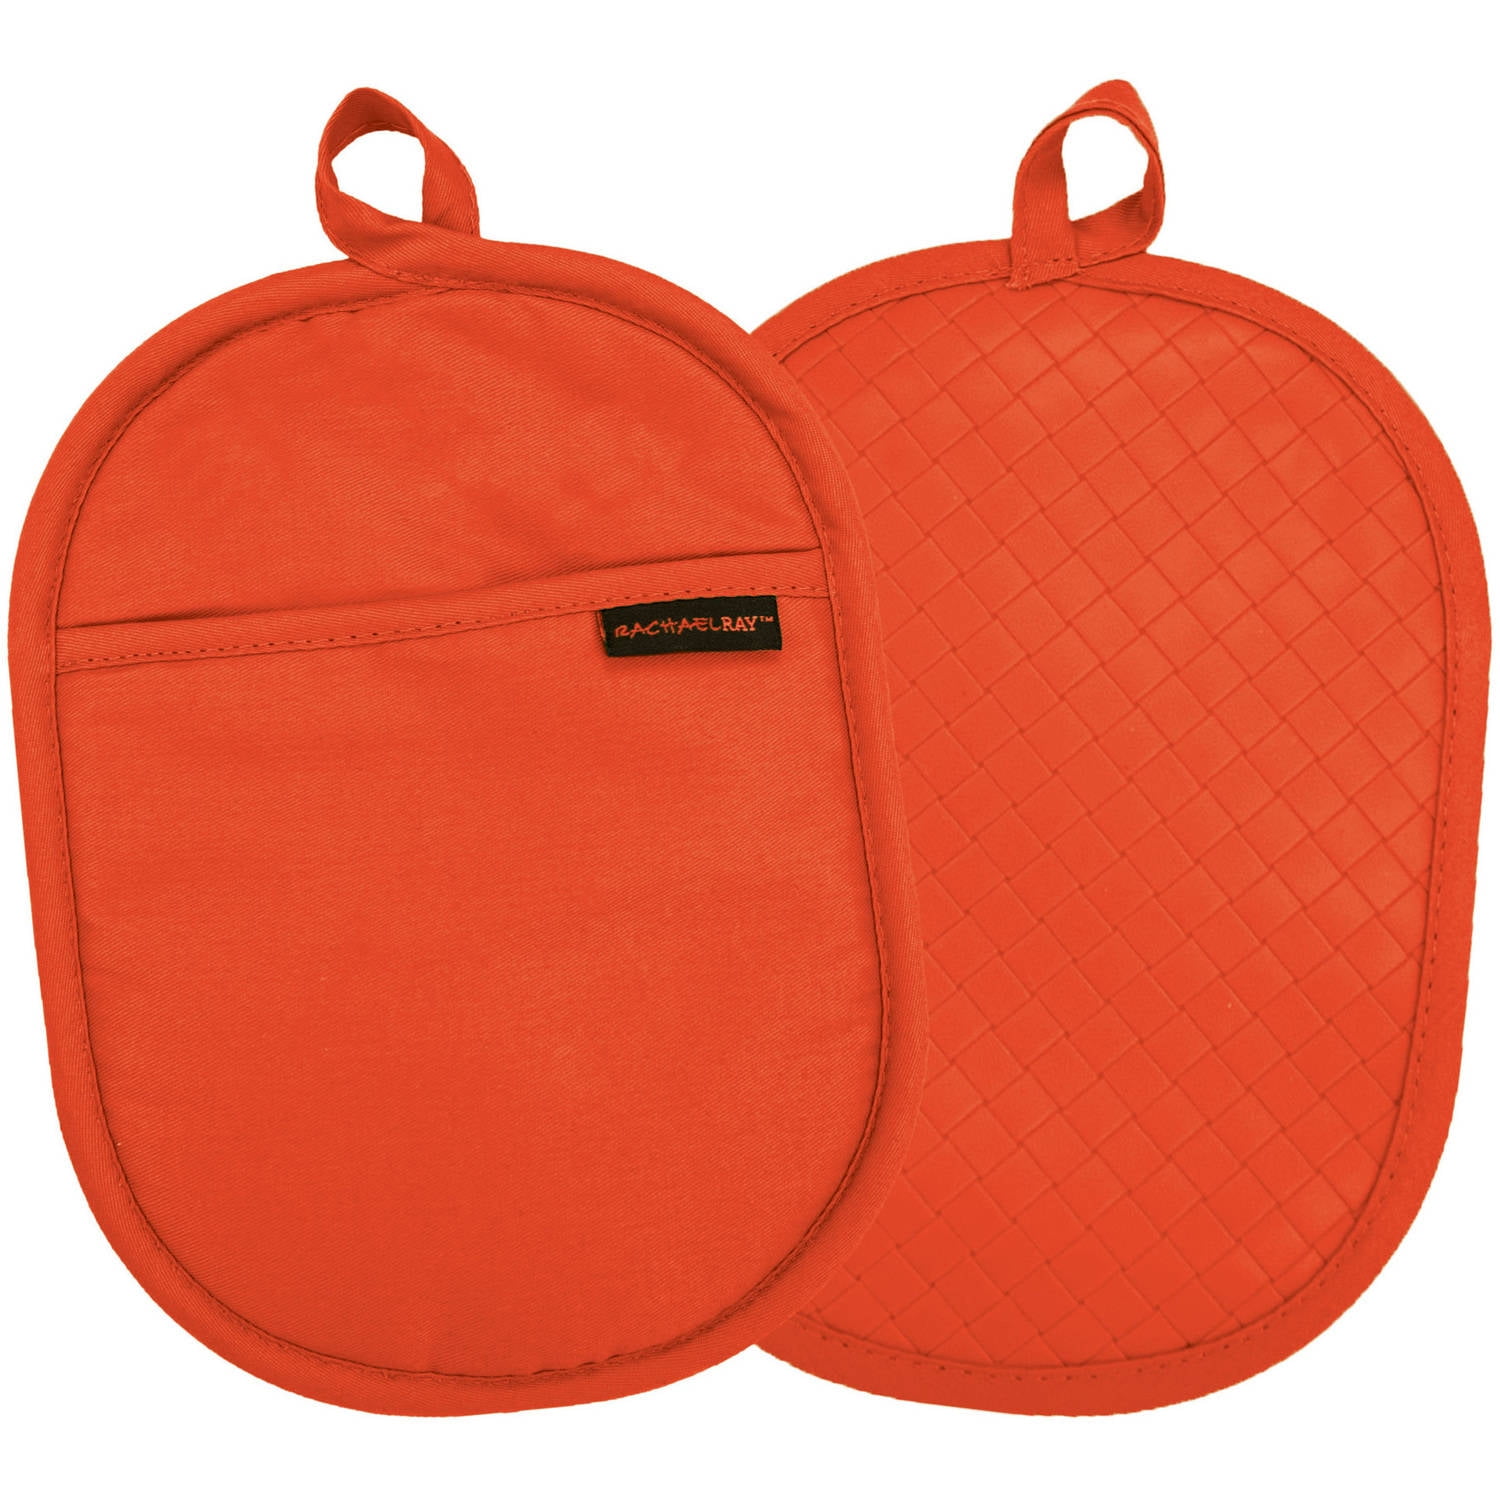 Rachael Ray Kitchen Towel and Oven Glove Moppine A 2-in-1 Kitchen Towel with Pot-Holder Pockets Burnt Orange